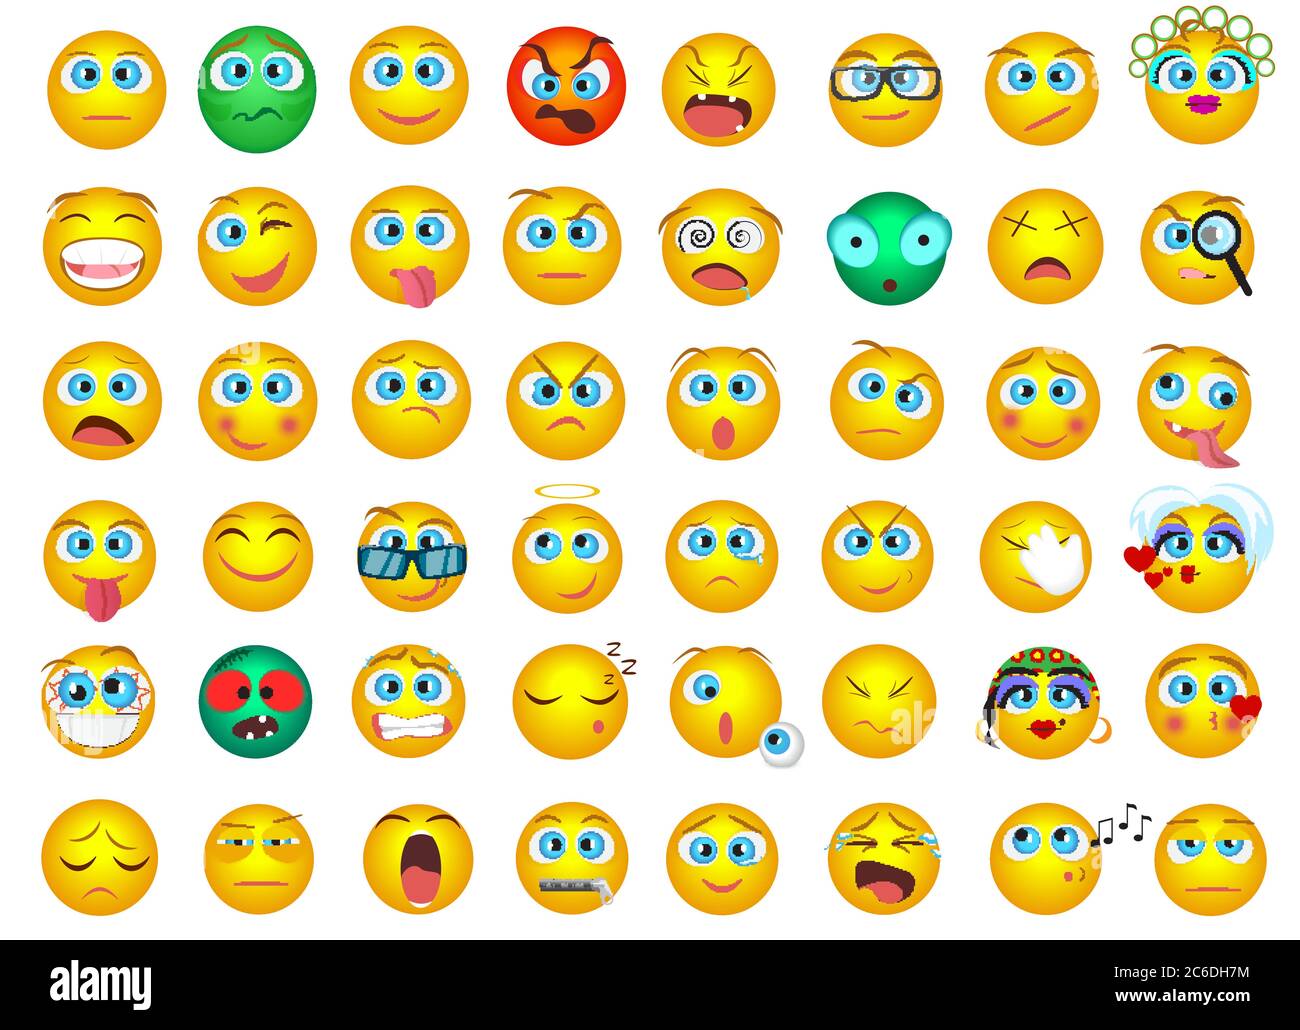 Mega big collection set of Emoji face emotion icons isolated Stock Vector